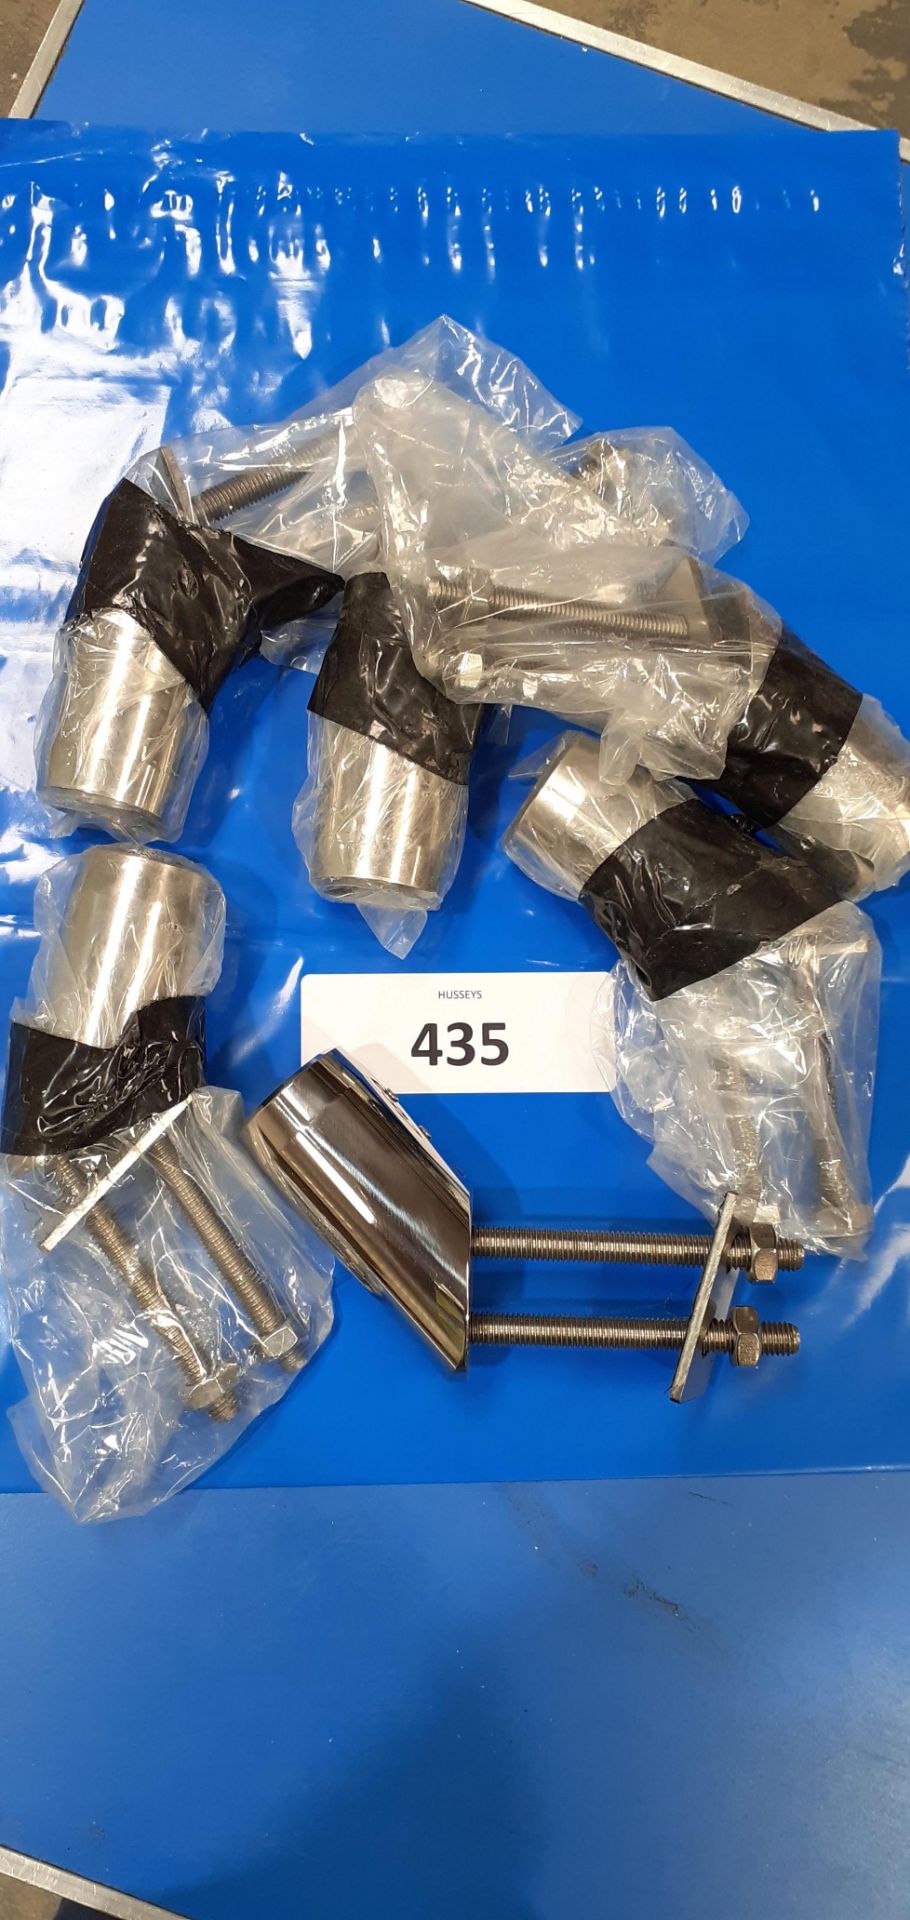 Stainless steel stanchion fittings with threaded bolt fixings (Qnty: 6)